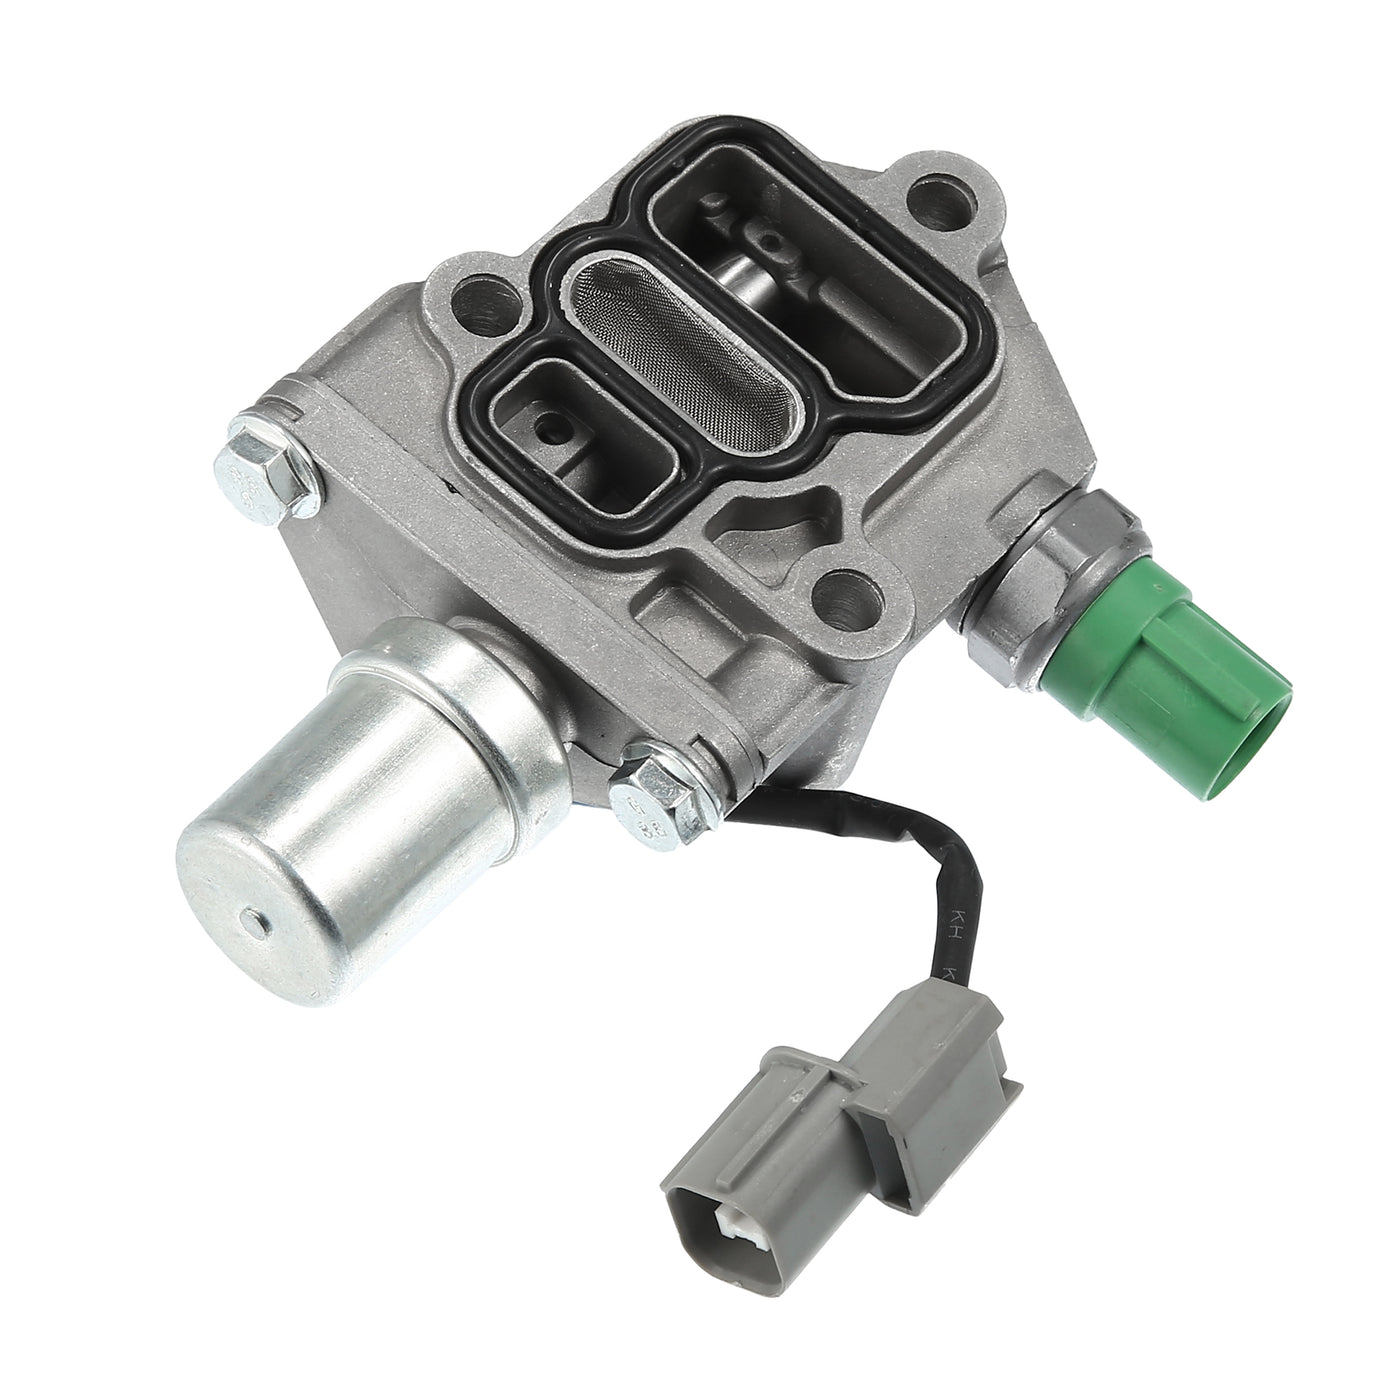 Motoforti Solenoid Spool Valve Assembly, for Honda Civic 1996-2000 D16Y8 Engine, Aluminum Alloy, with Gasket, 15810P2RA01, Silver Tone Green, 1 Set